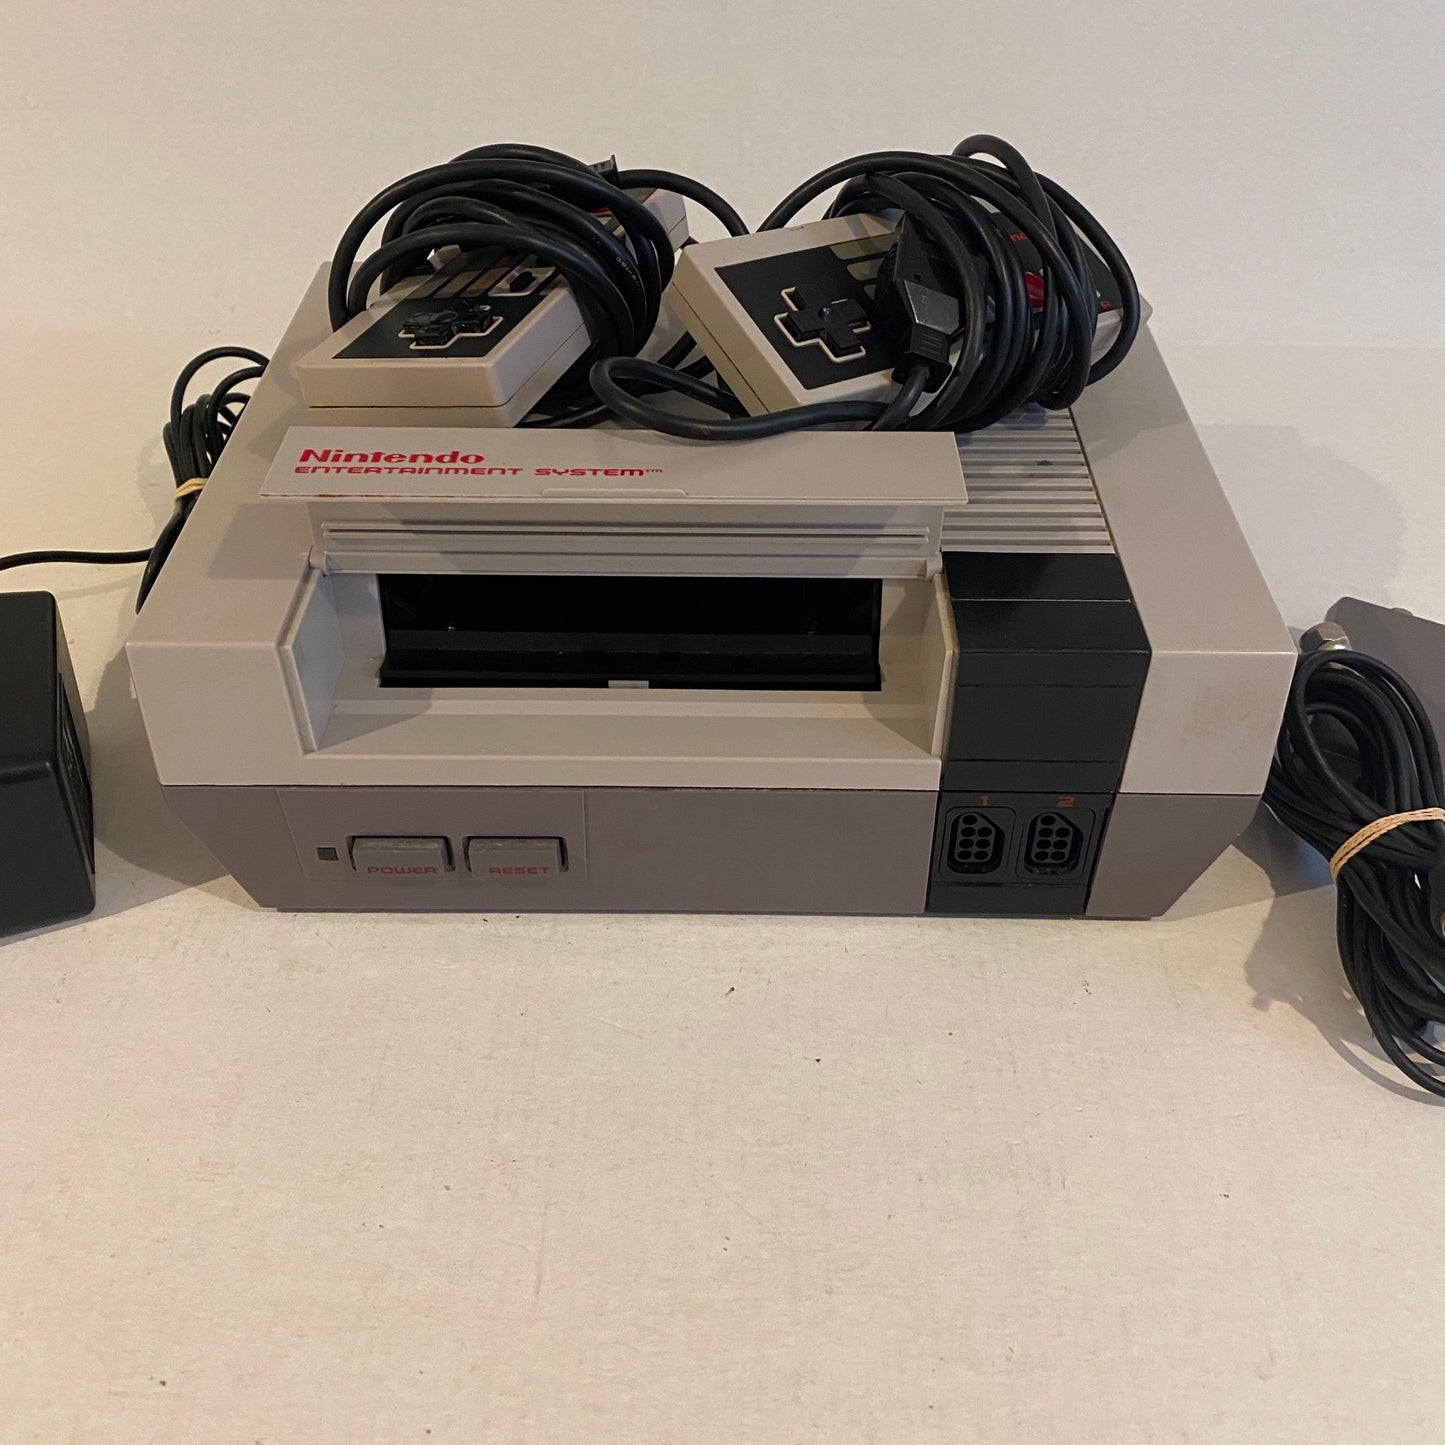 Original Nintendo NES Console with Two Controllers